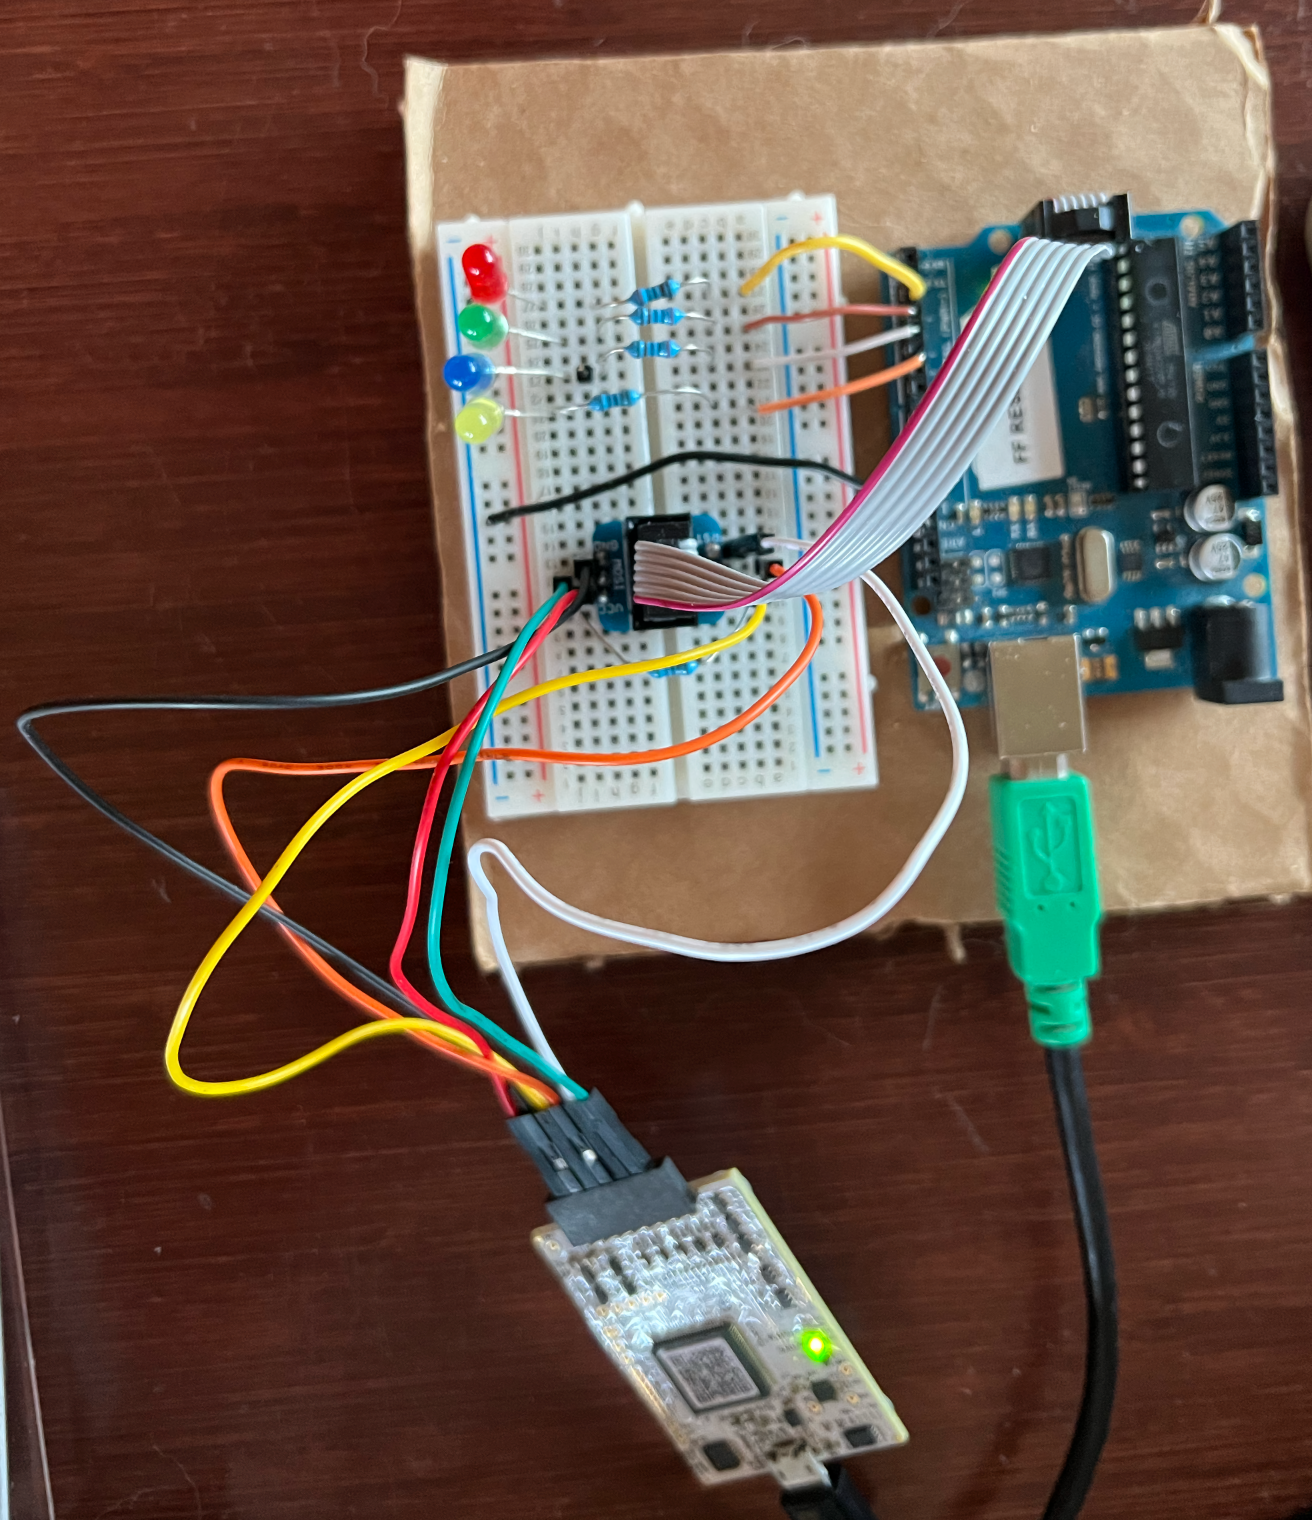 Breadboard with Uno and Snap connected